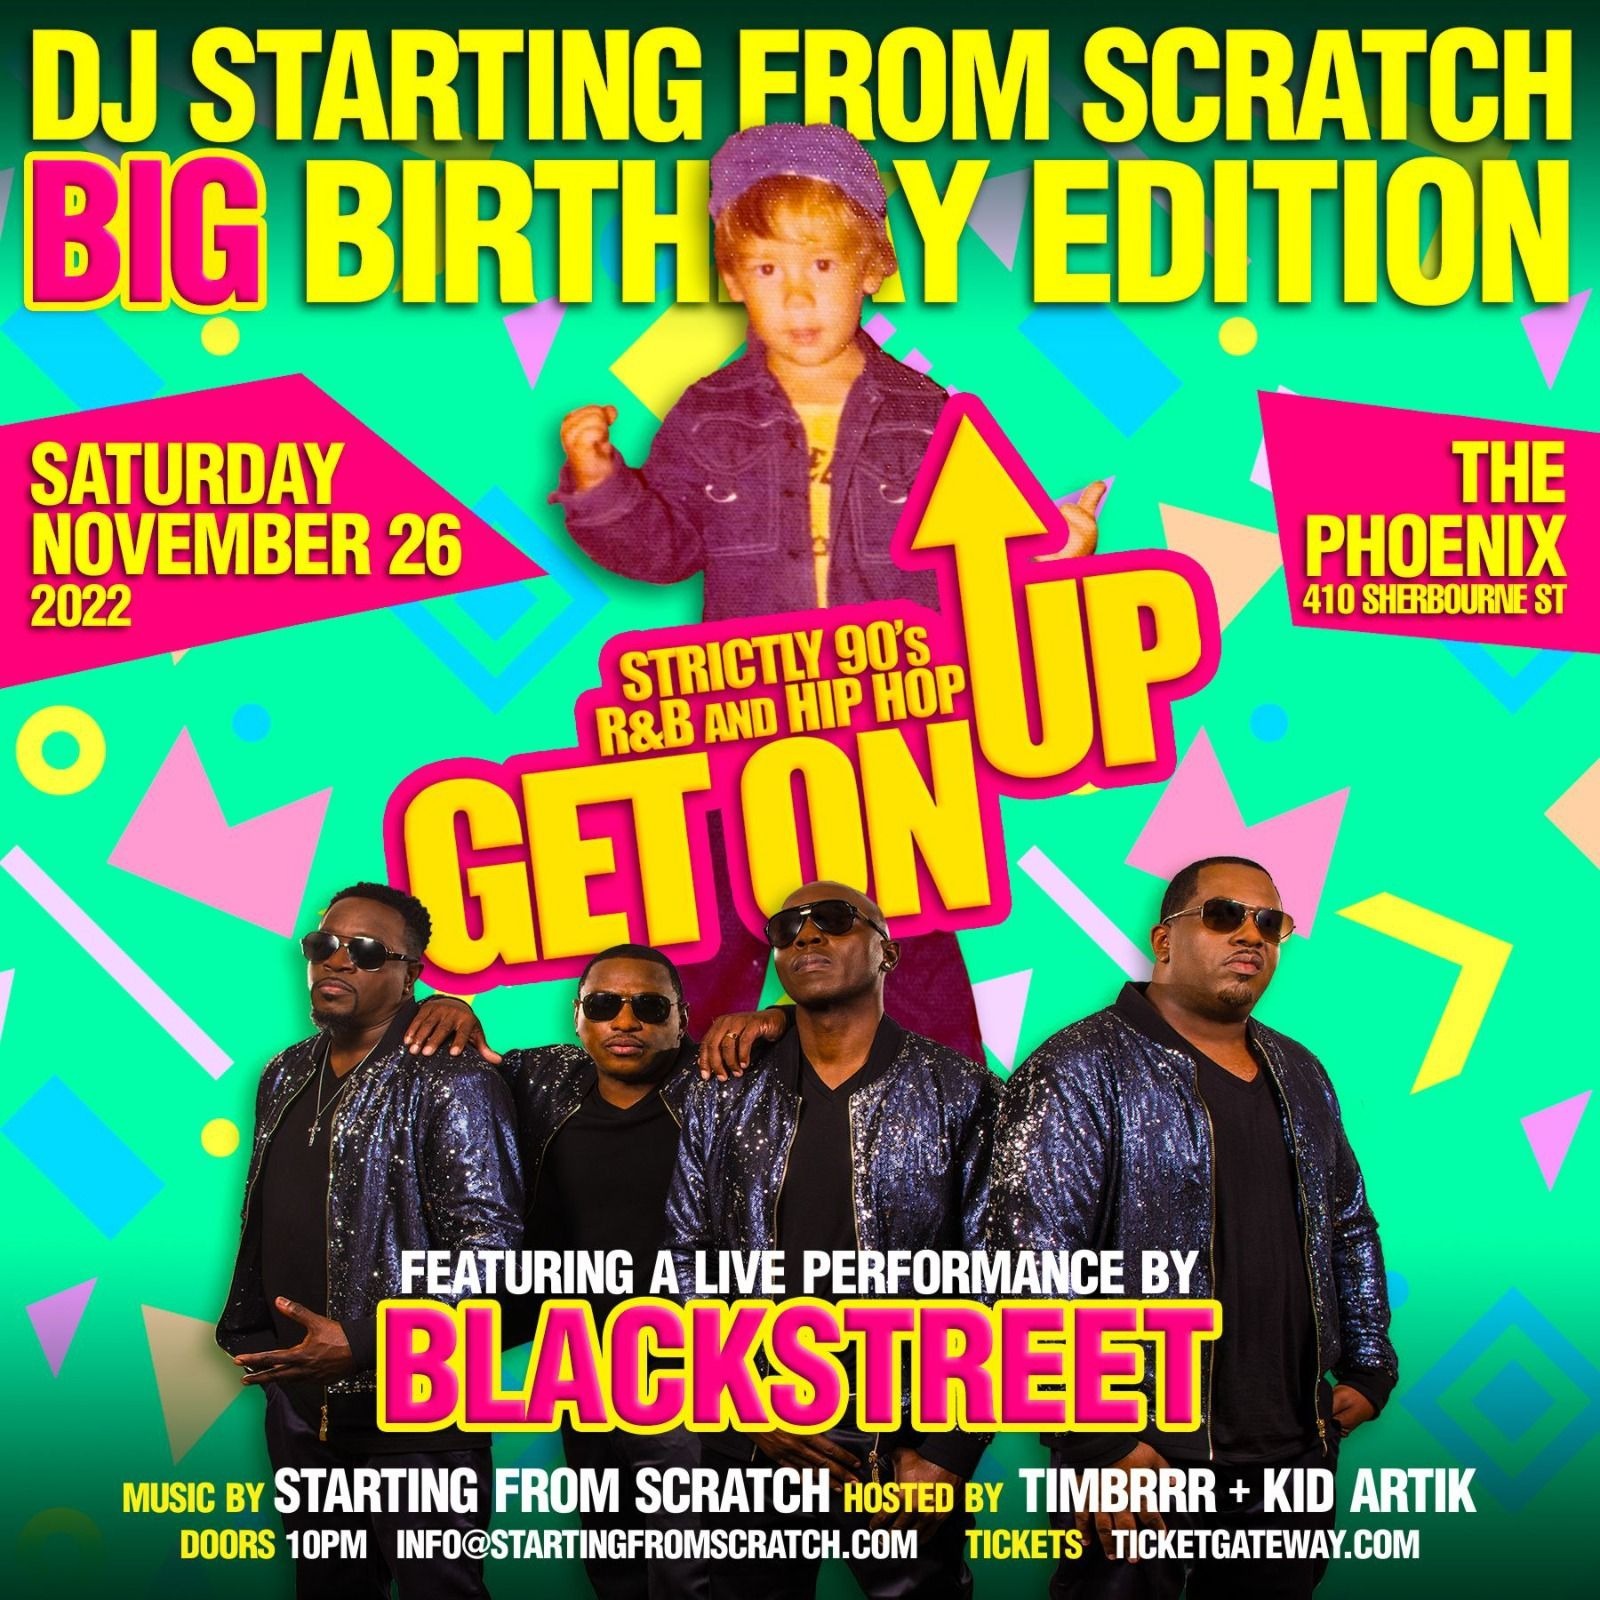 GET ON UP ~ STRICTLY 90S R&B AND HIP HOP  - THE BIG BIRTHDAY FEAT BLACKSTREET